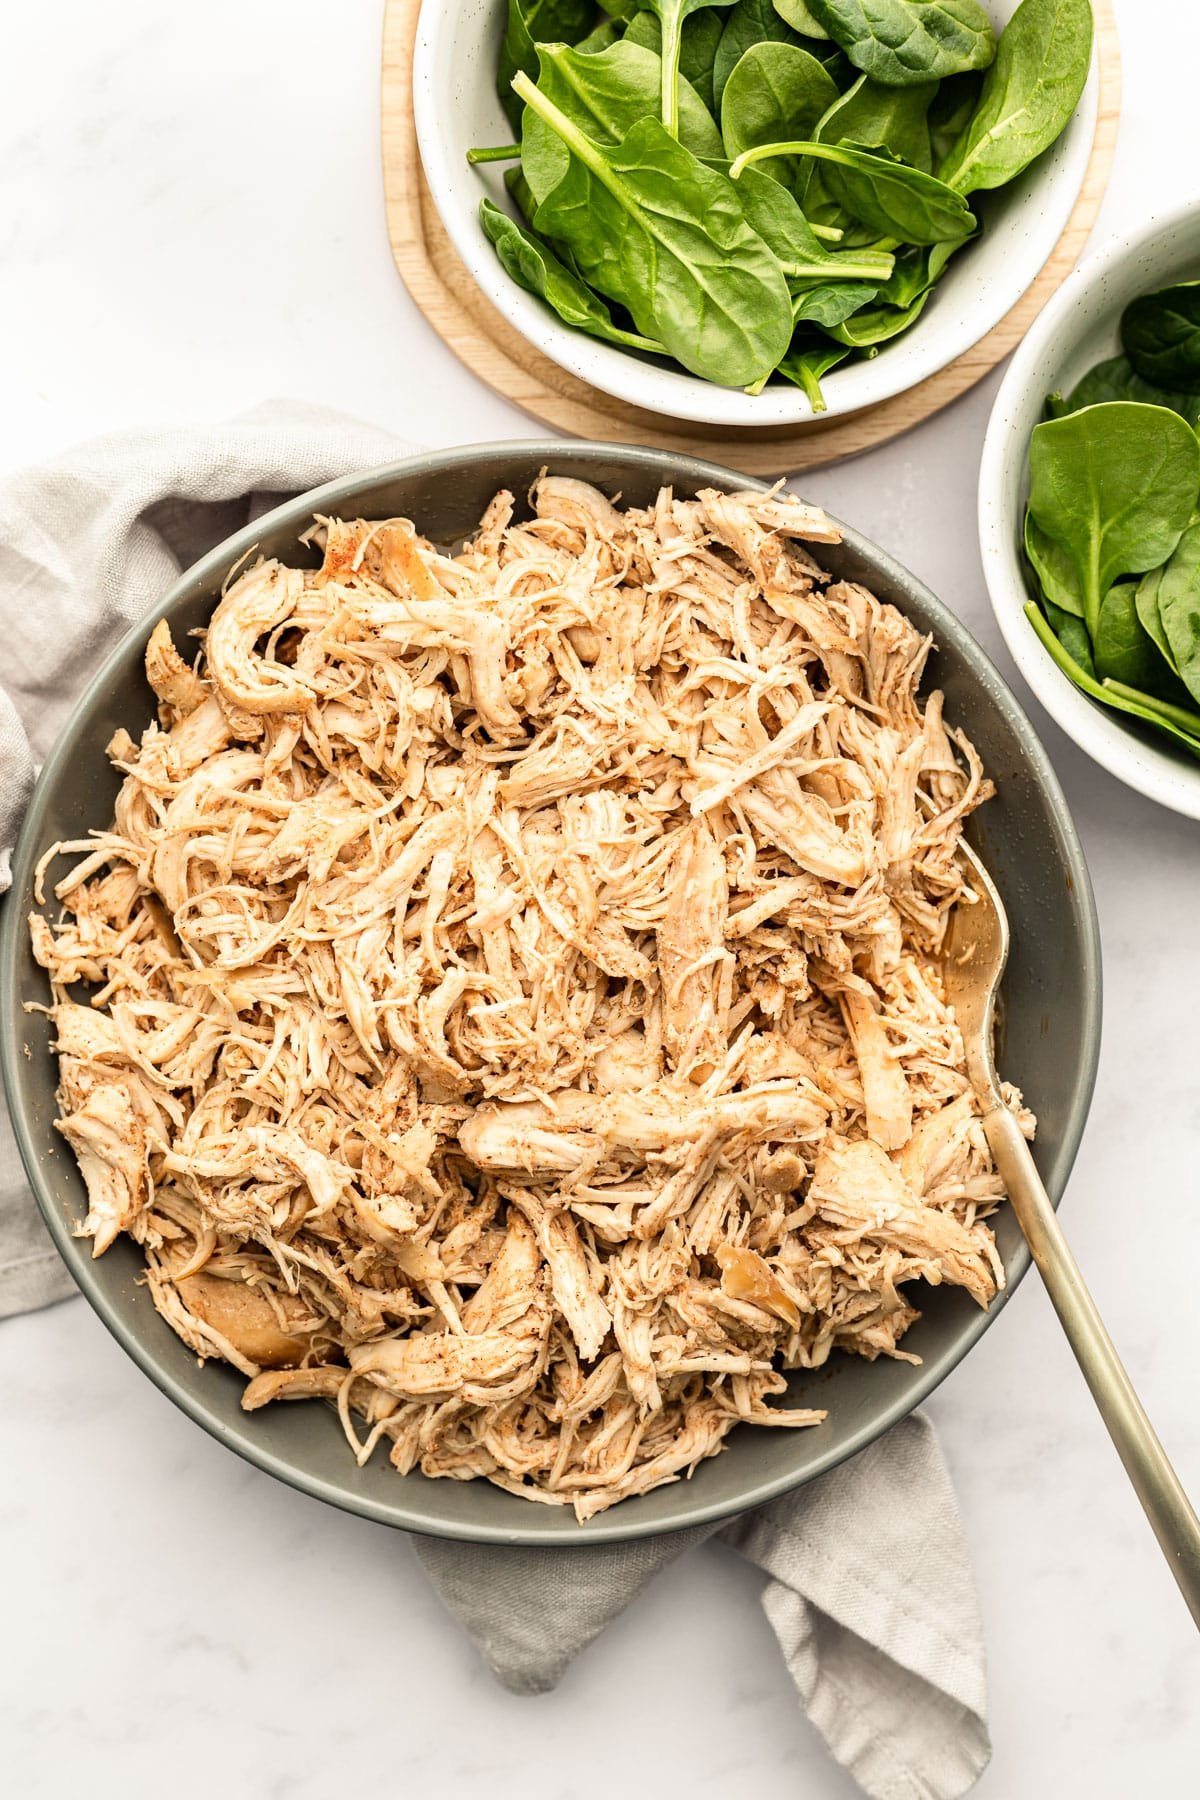 Slow cooker shredded chicken in a bowl